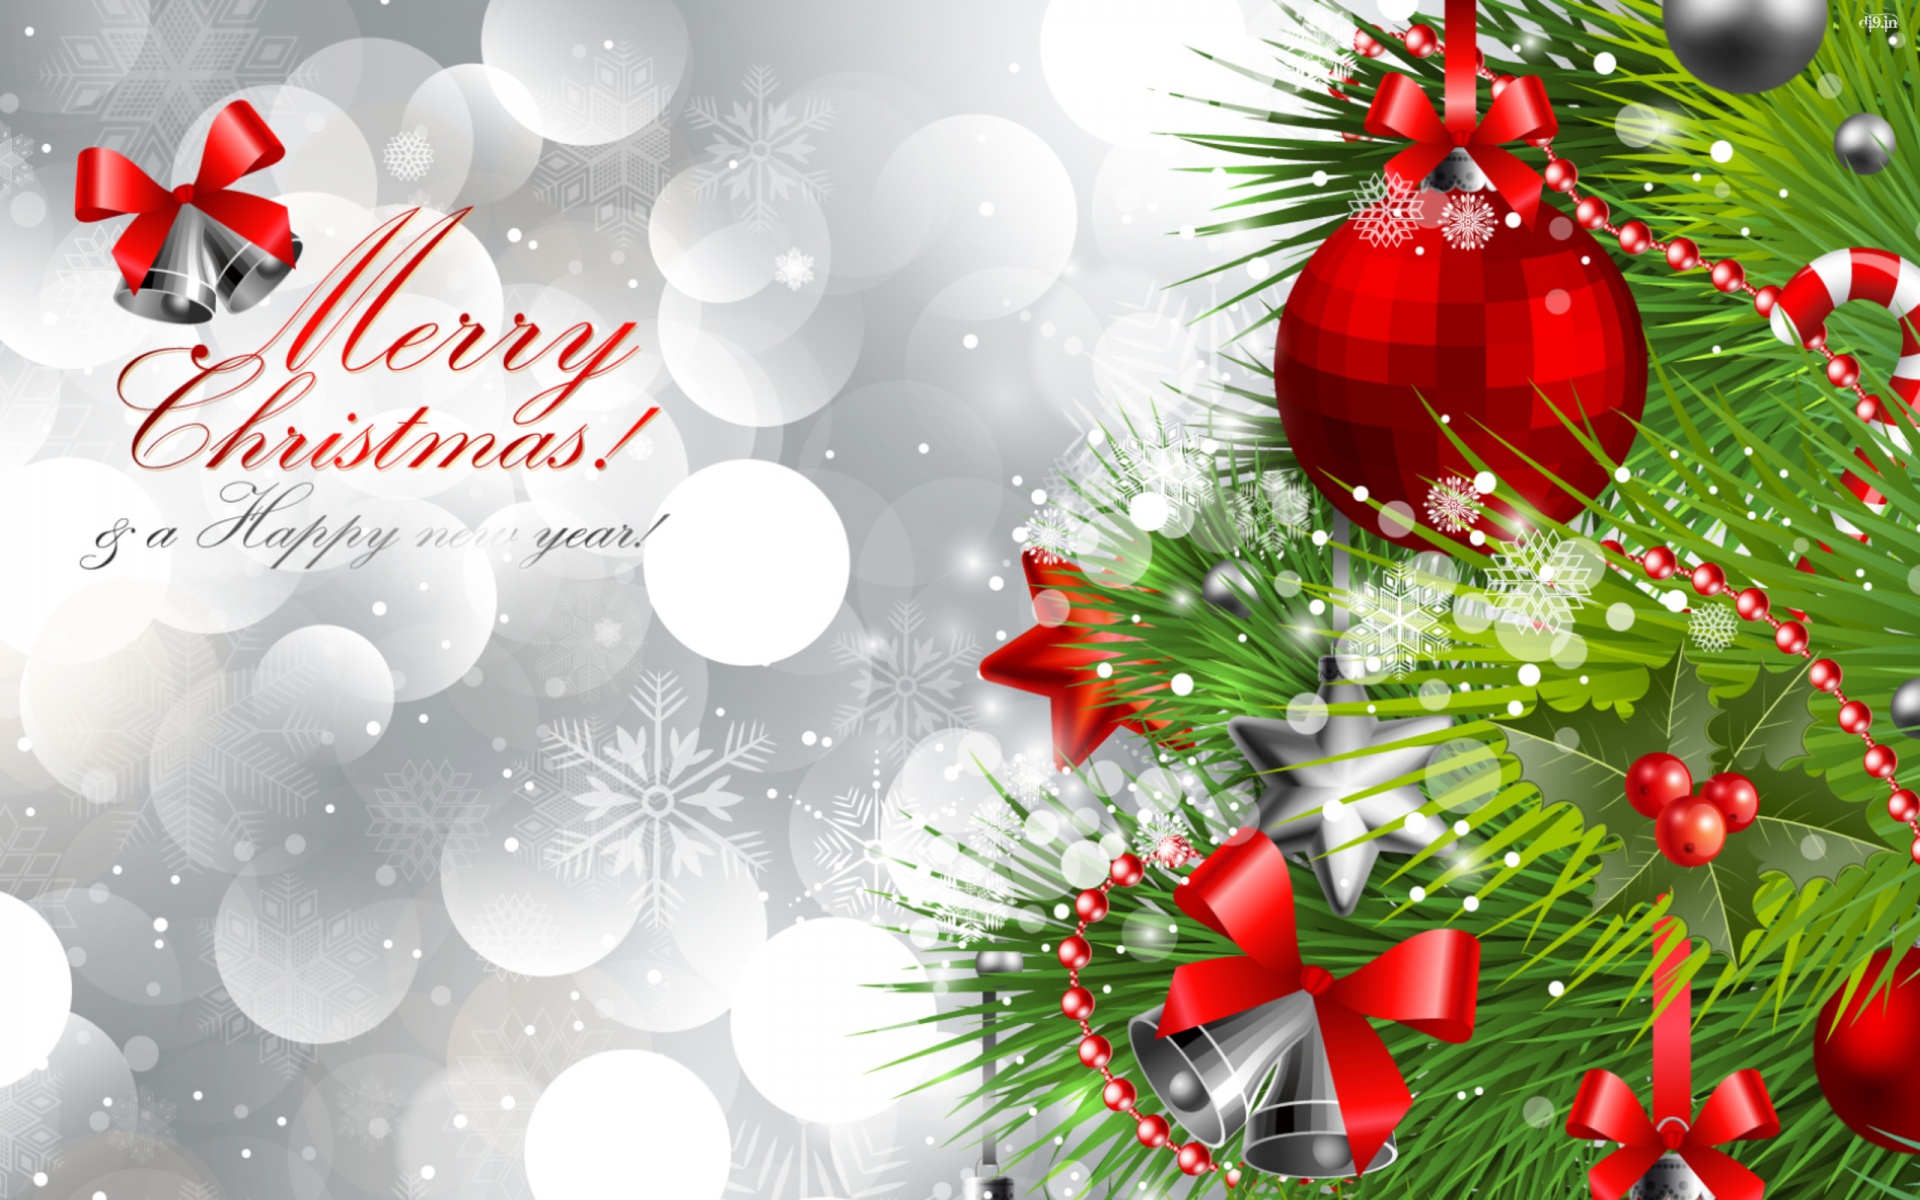 Merry Christmas 2014 Wallpapers